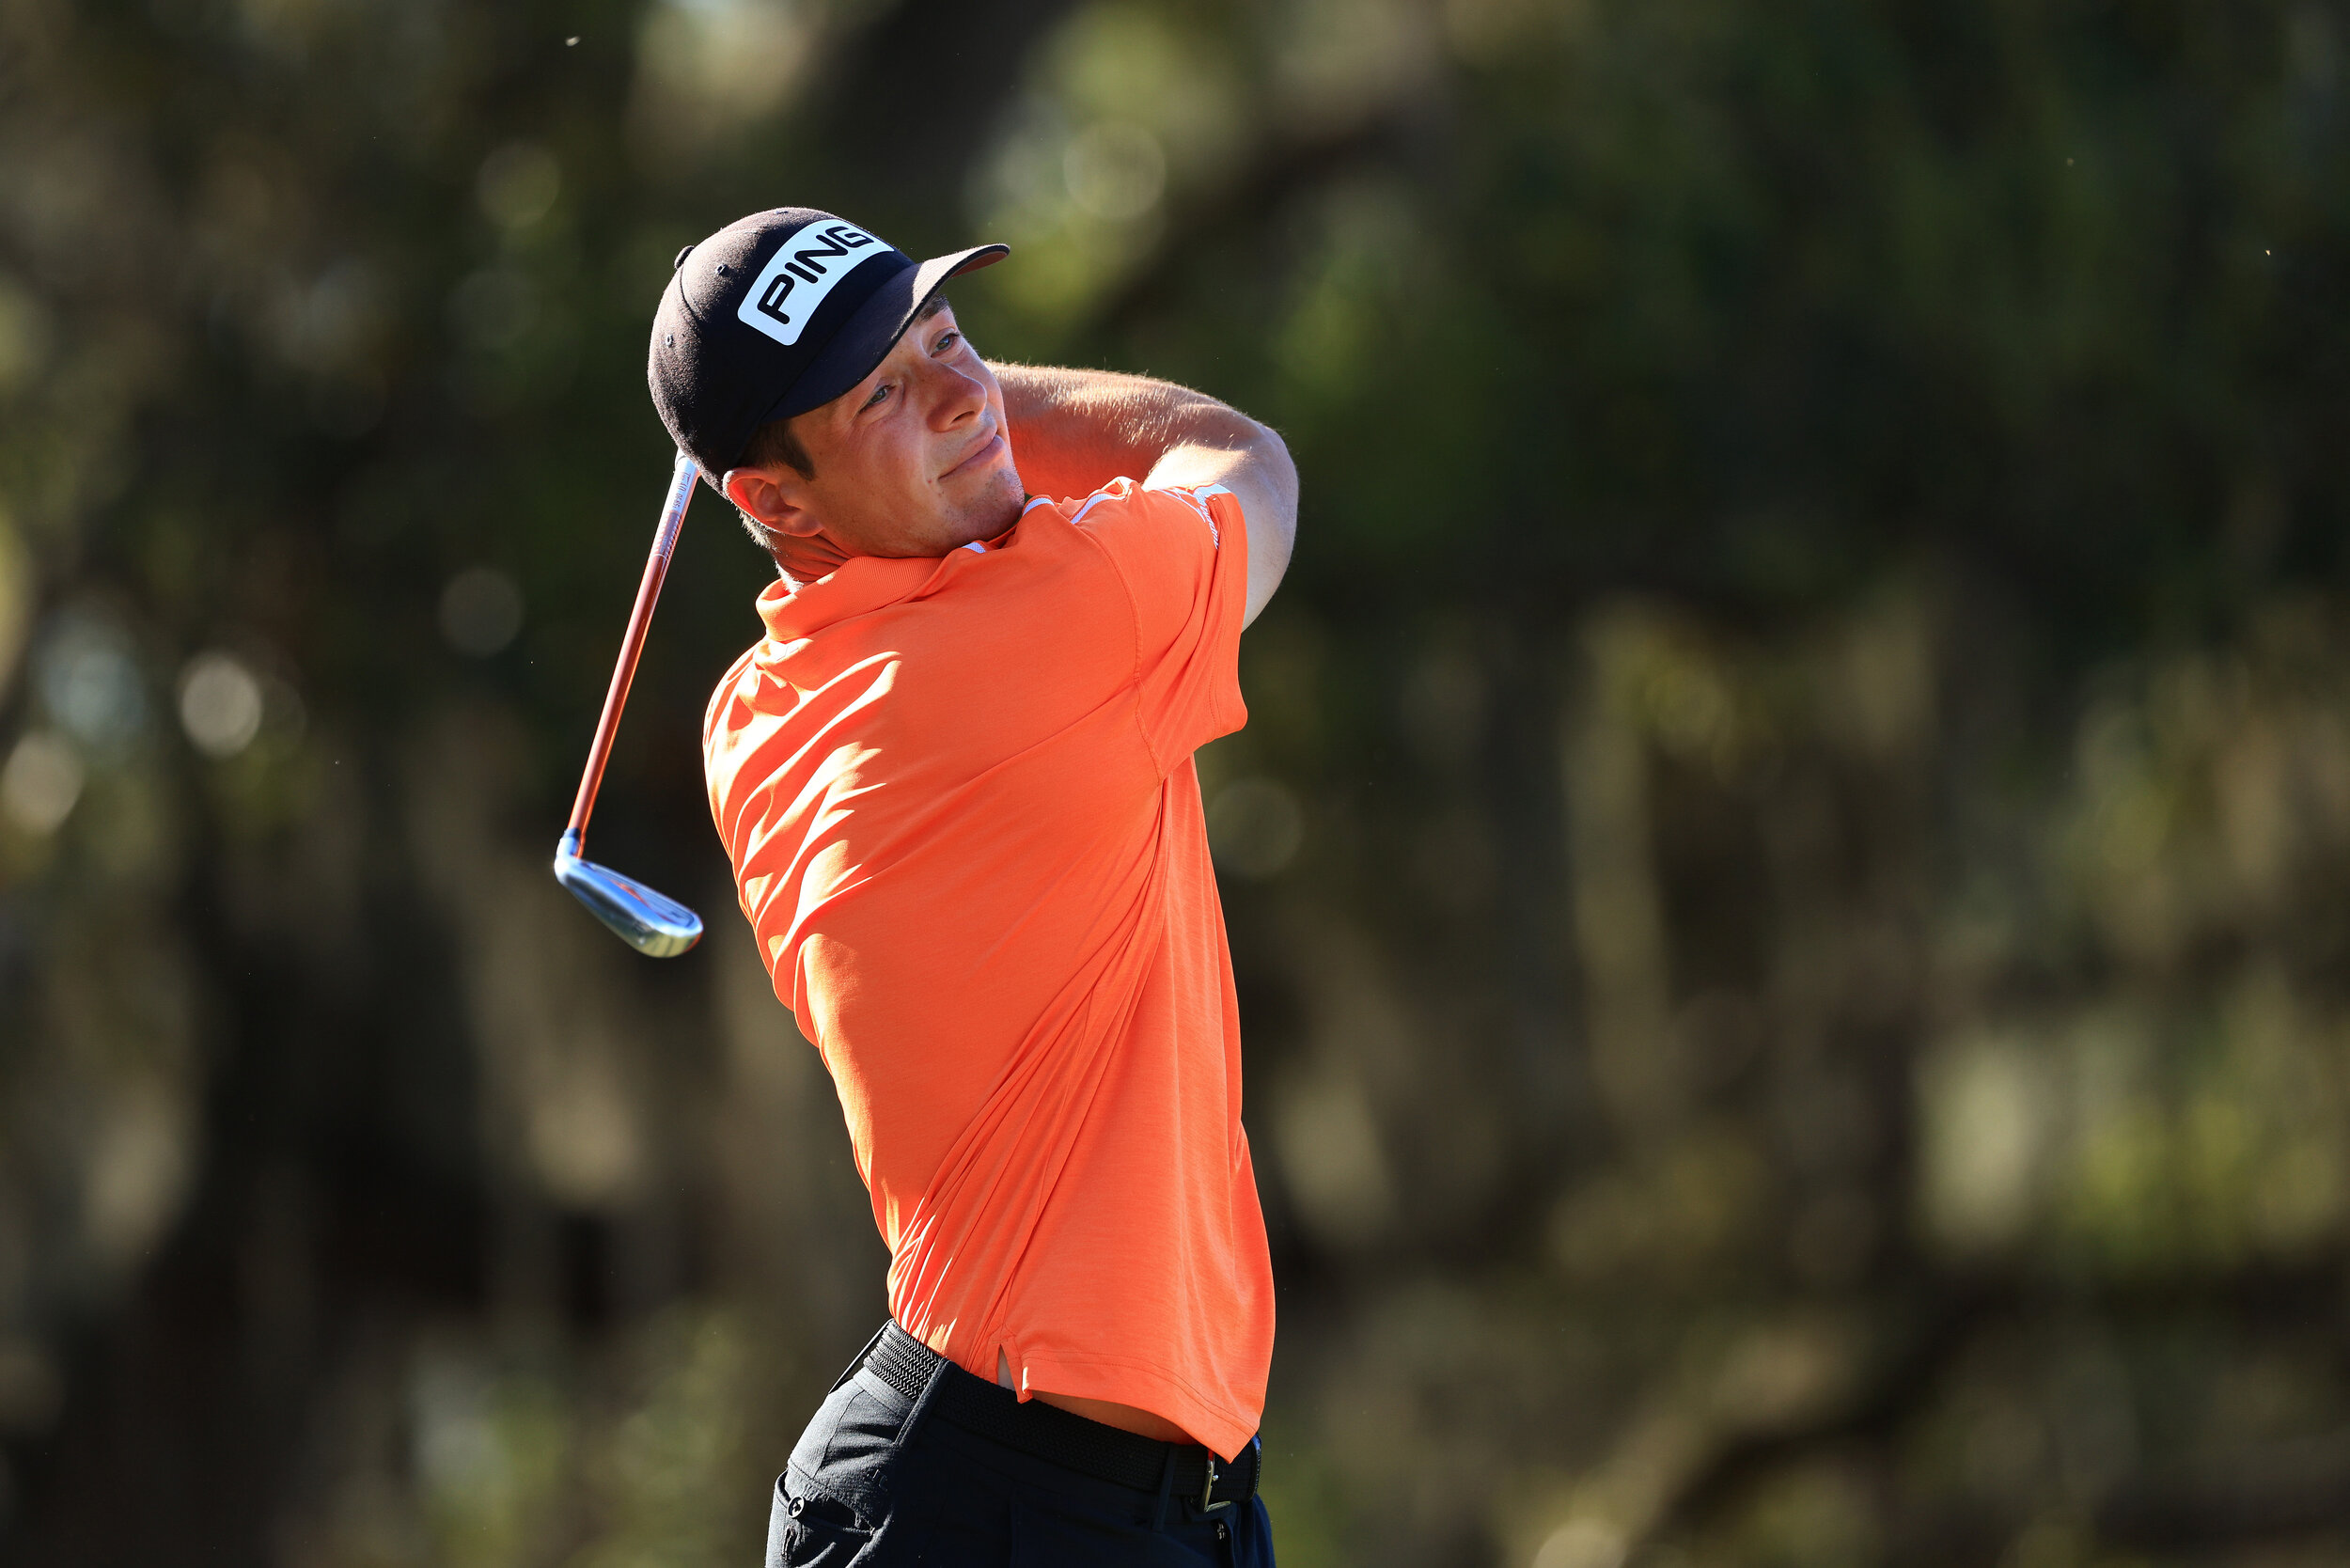  BRADENTON, FLORIDA - FEBRUARY 28: Viktor Hovland of Norway plays his shot from the 15th tee mduring the final round of World Golf Championships-Workday Championship at The Concession on February 28, 2021 in Bradenton, Florida. (Photo by Mike Ehrmann